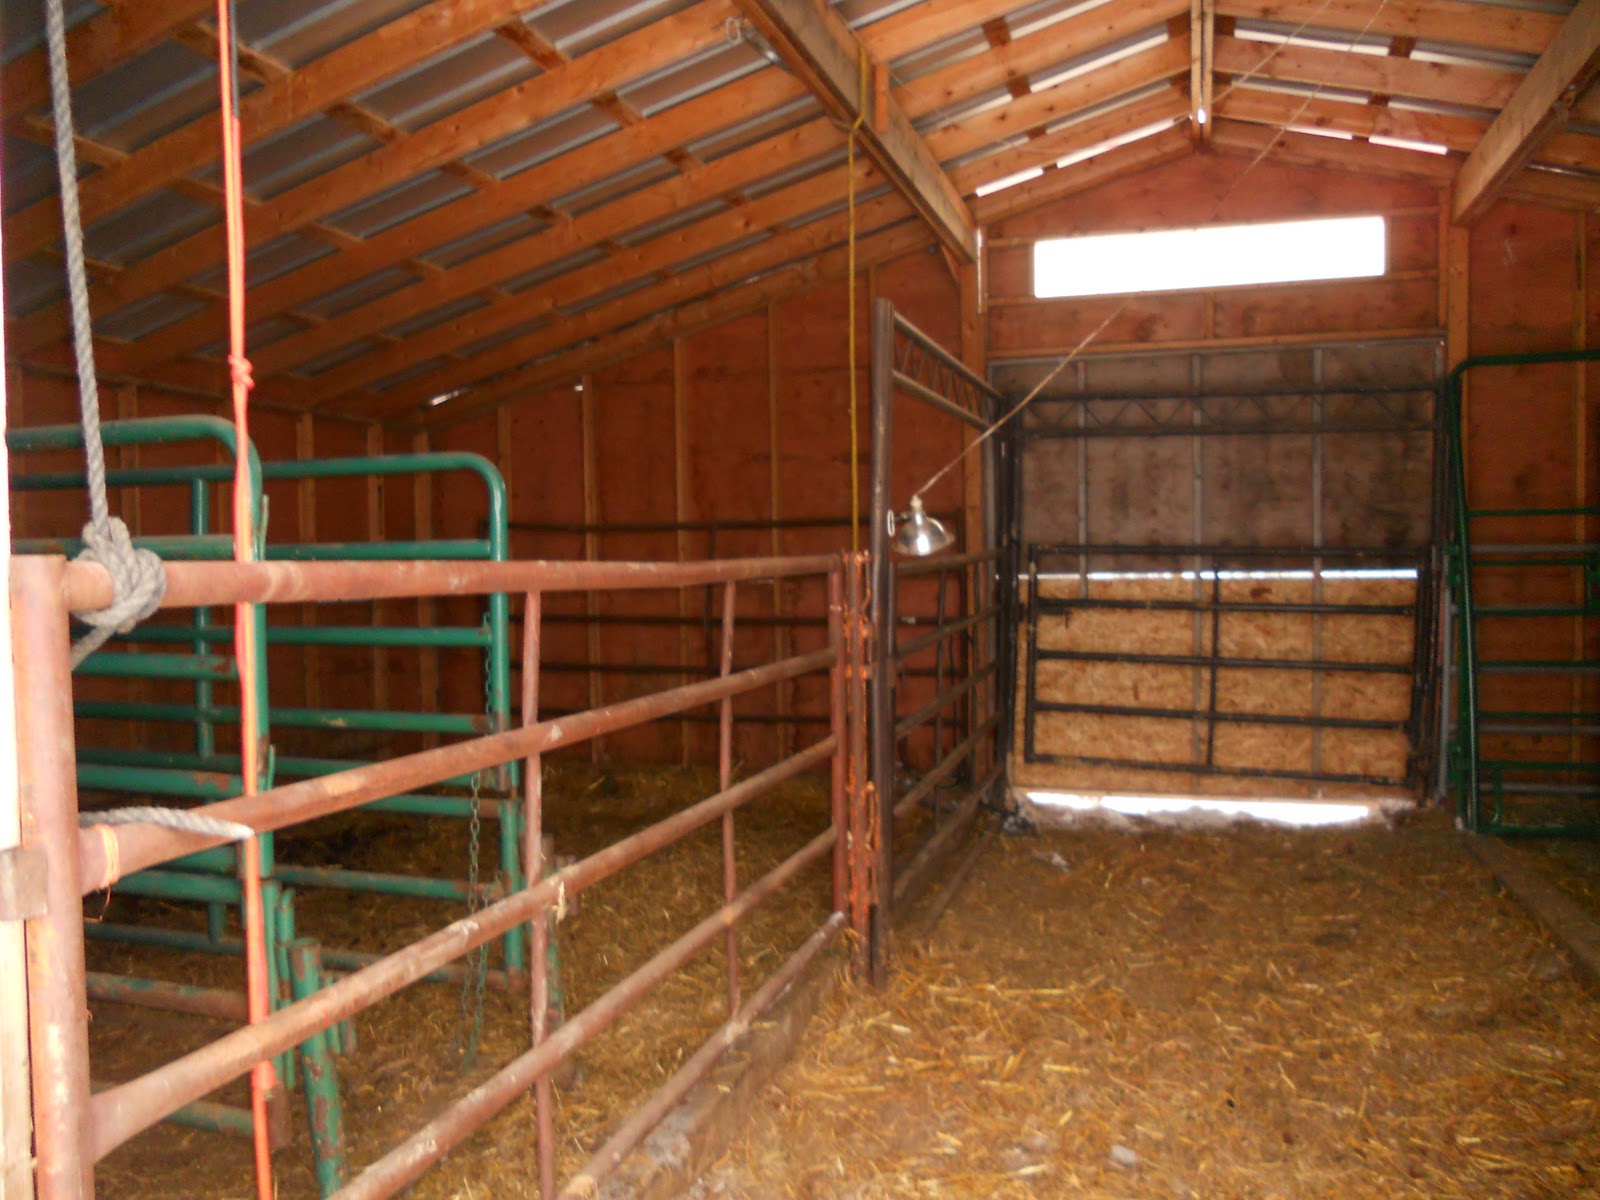 crystal cattle: the calving barn